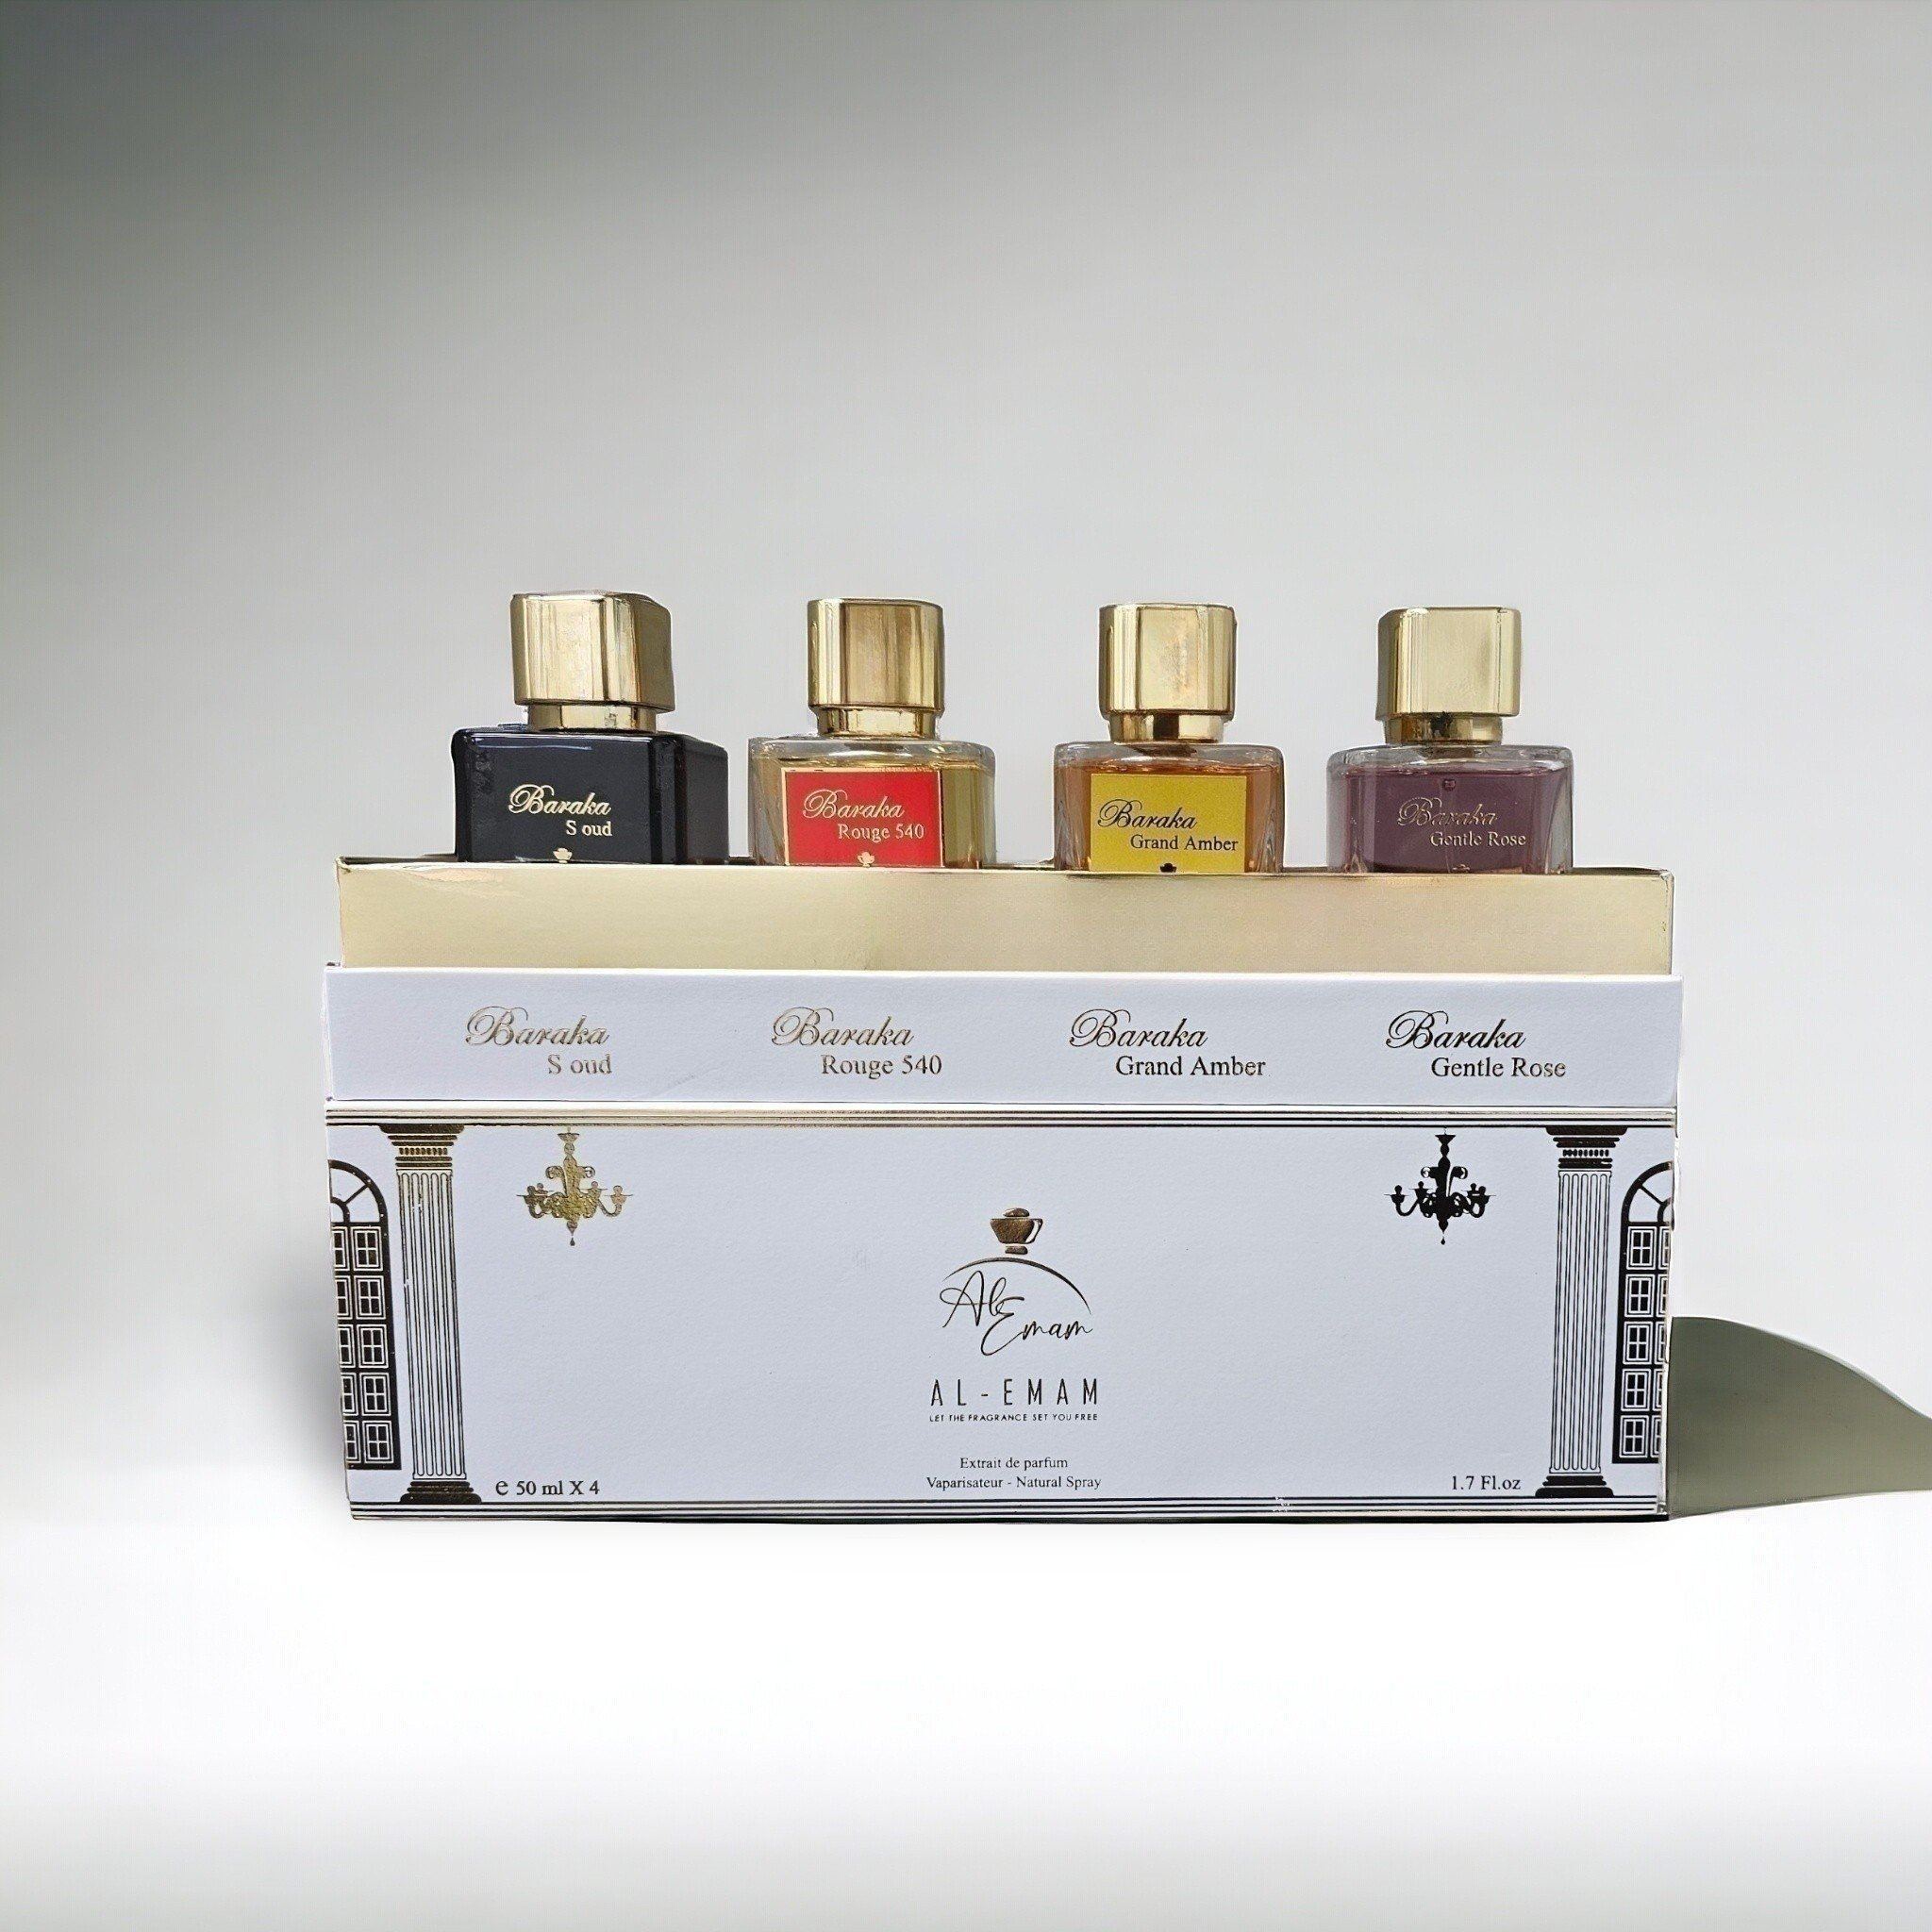 1000042924 Al-Emam White 4 Piece Perfume Gift Set (4 X 50Ml Extrait De Parfum), Indulge In The Al-Emam Collection, A Quartet Of Perfumes That Are As Nuanced As Captivating. Each 50Ml Bottle Offers A Unique Olfactory Journey, Crafted To Stir The Senses And Leave A Lasting Impression. Soghaat Gifts &Amp; Fragrances